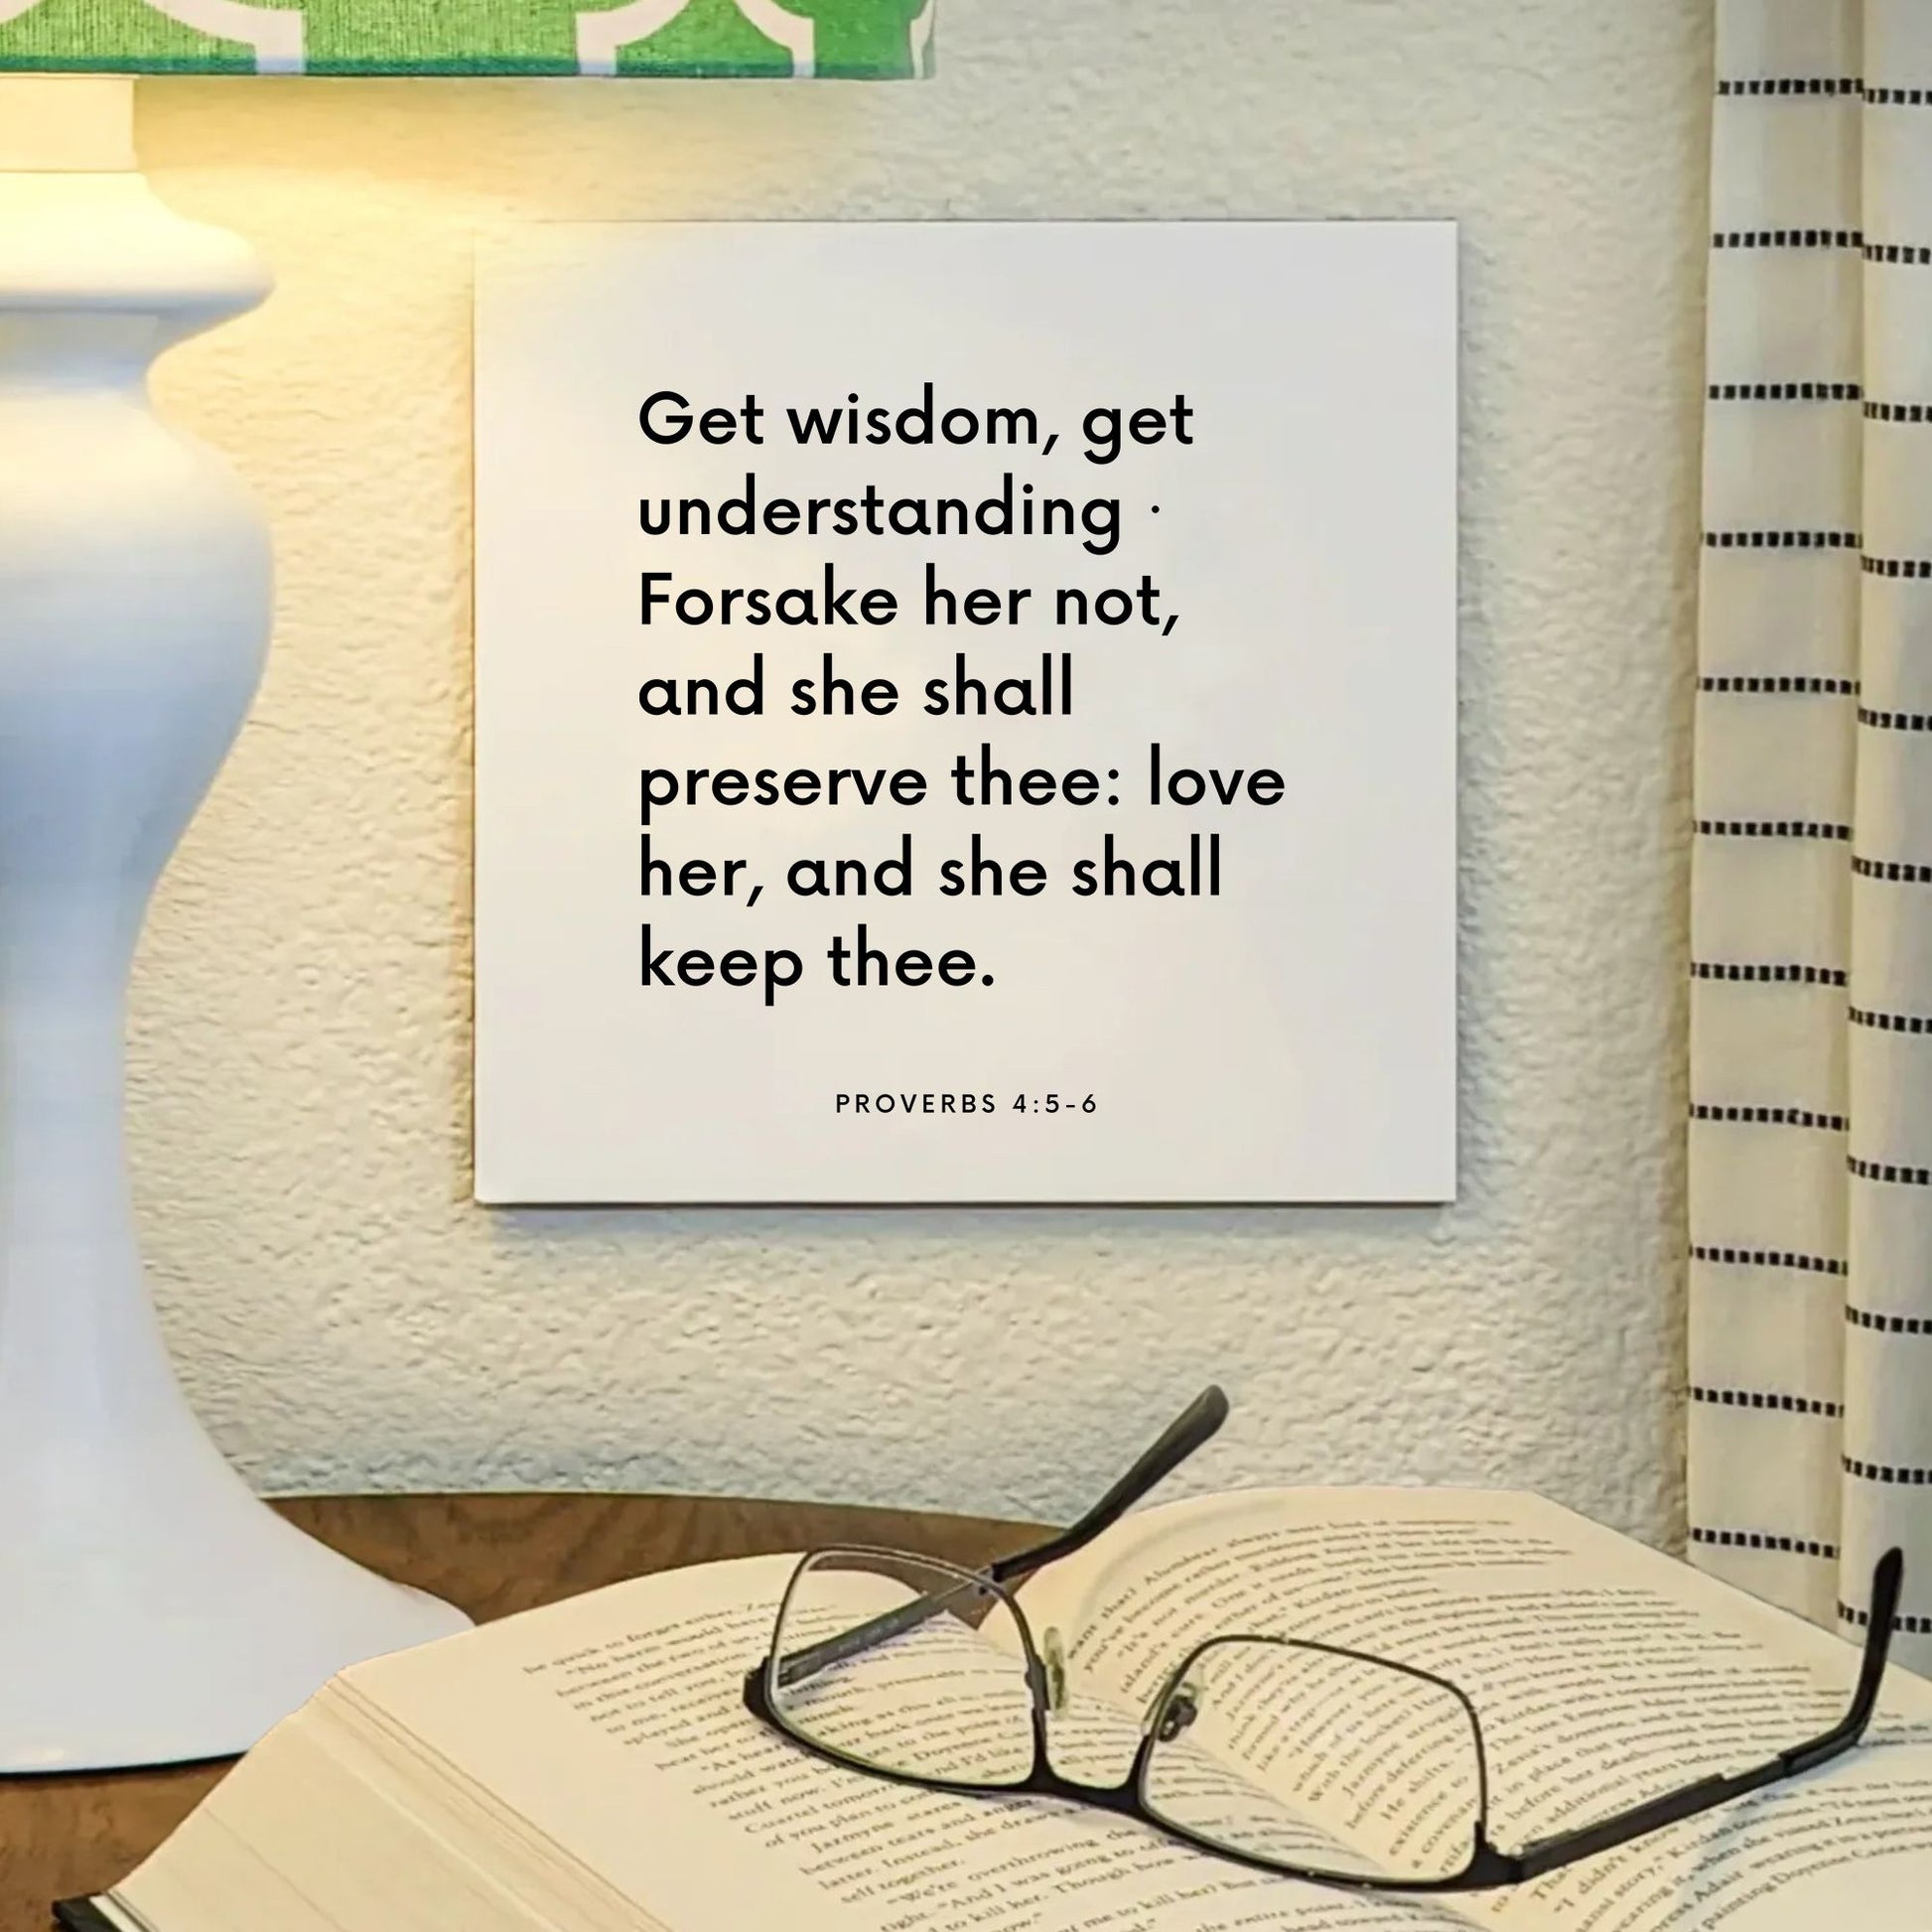 Lamp mouting of the scripture tile for Proverbs 4:5-6 - "Get wisdom, forsake her not, and she shall preserve thee"